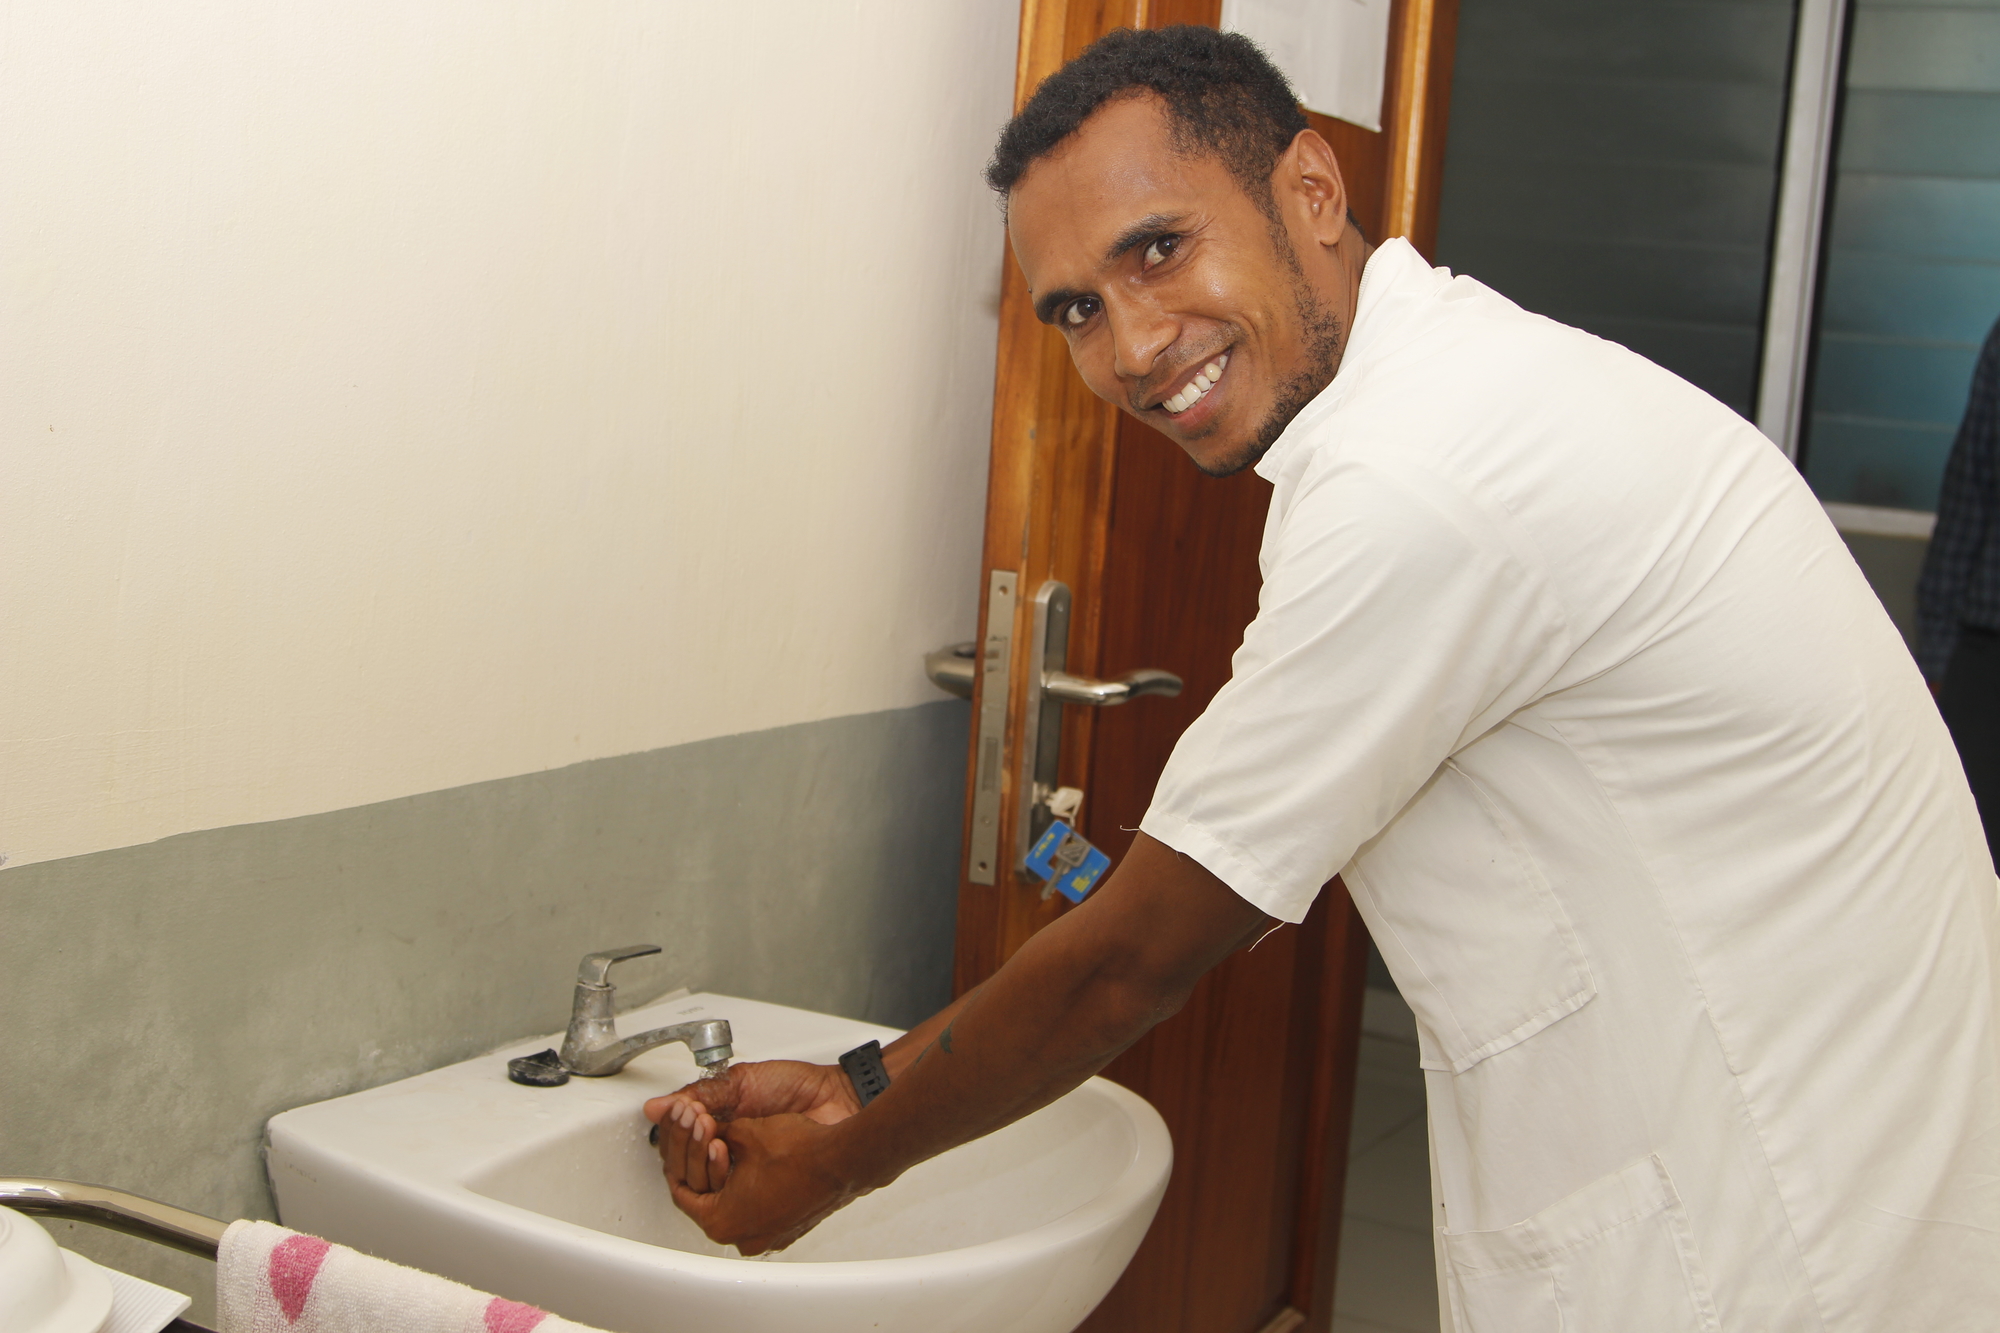 Emilio, a doctor at a local health centre, said that the clean water connection has helped him to carry out his duties to serve his community. Photo: Jaime dos Reis/World Vision